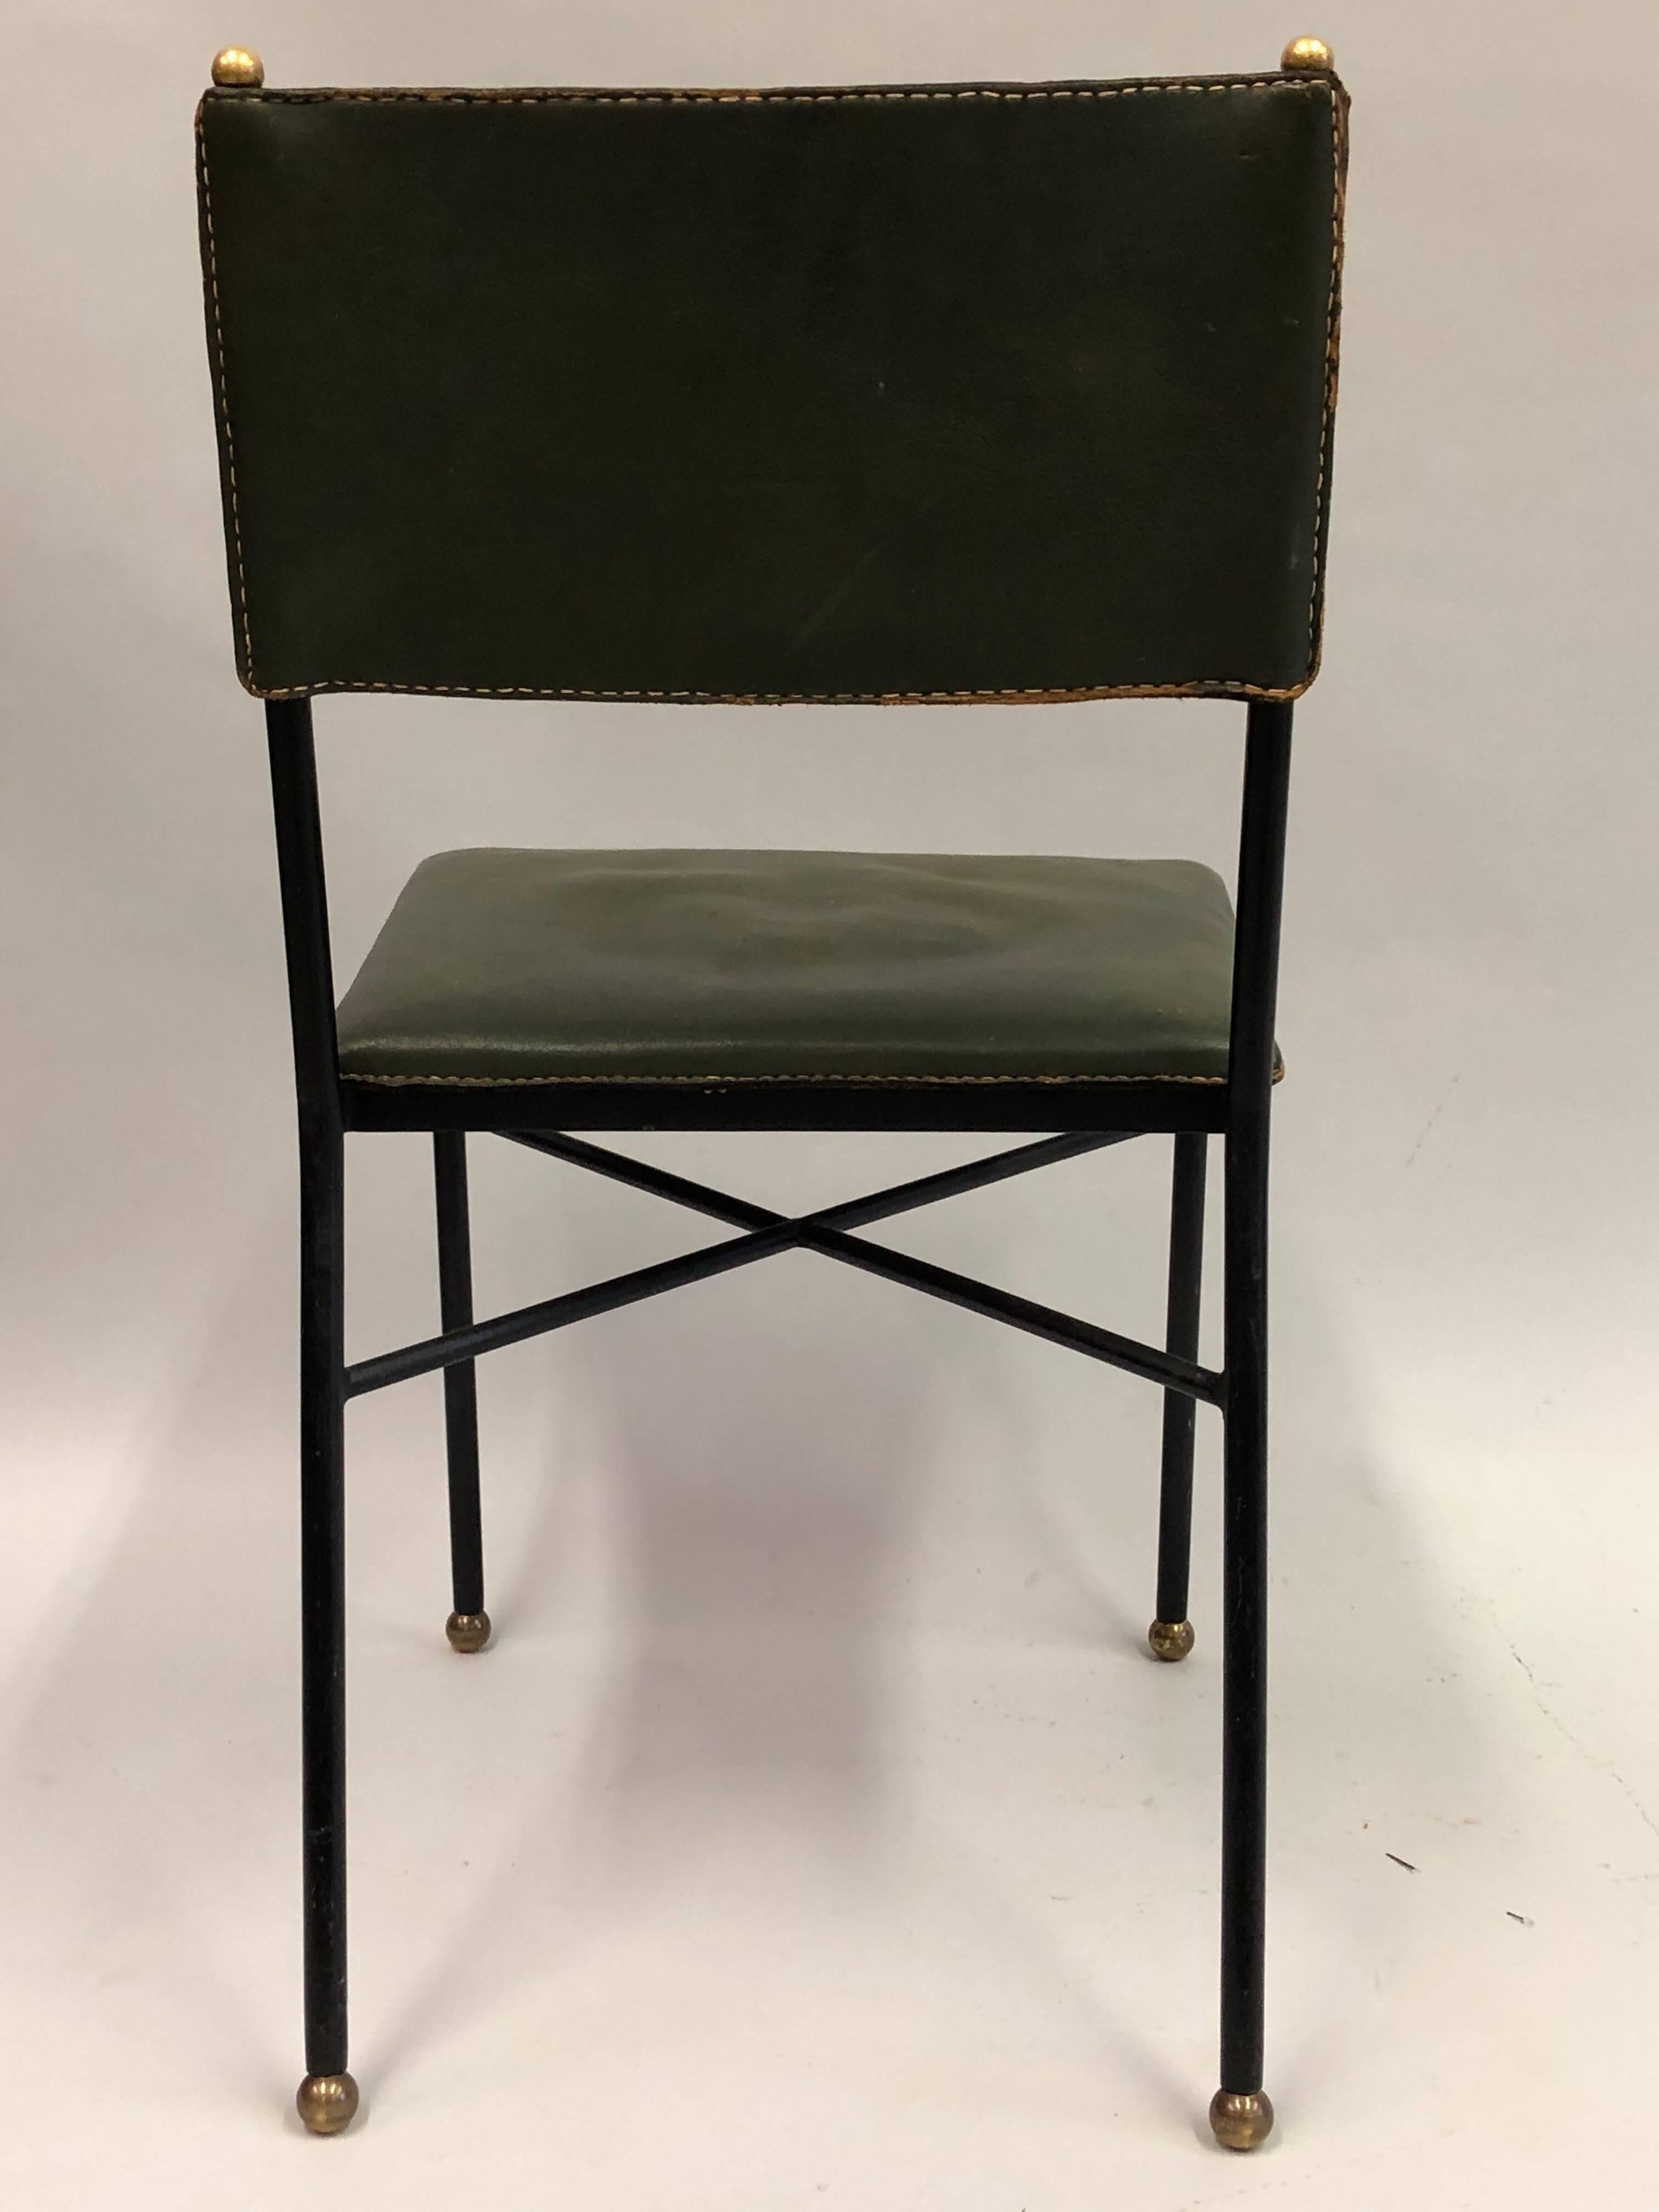 20th Century French Mid-Century Modern Hand-Stitched Leather Desk/Side Chair, Jacques Adnet